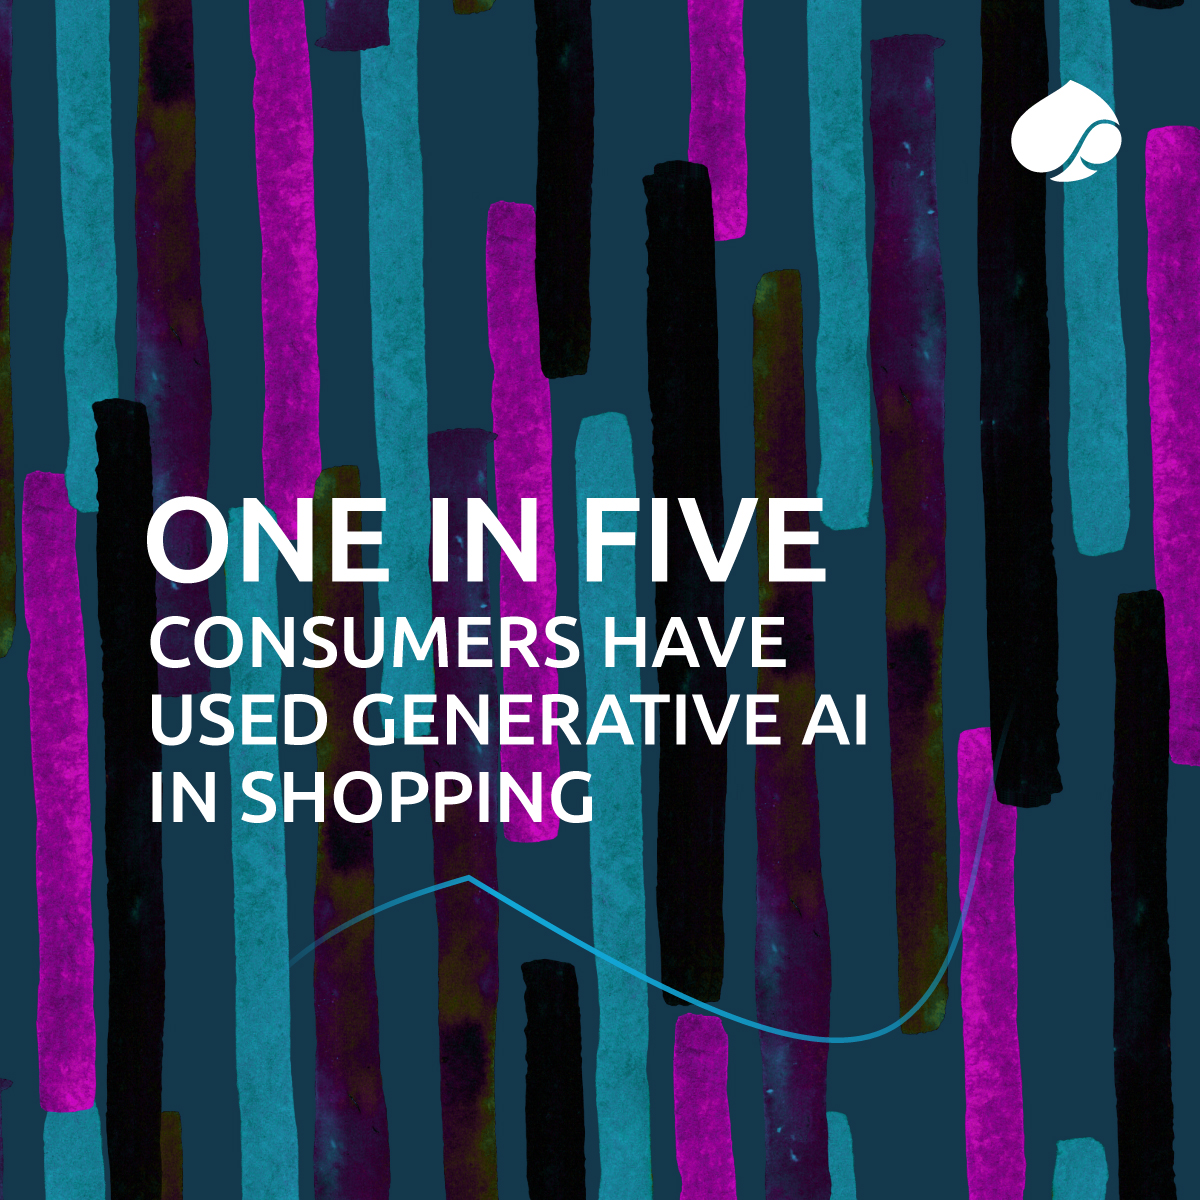 #DYK #GenerativeAI is not just used by Gen Z, but by consumers across generations for their #ShoppingExperience?

Download our #ConsumerTrends report to unpack more insights 📥 bit.ly/3NYT2Kz

#ConsumerBehavior #GenAI